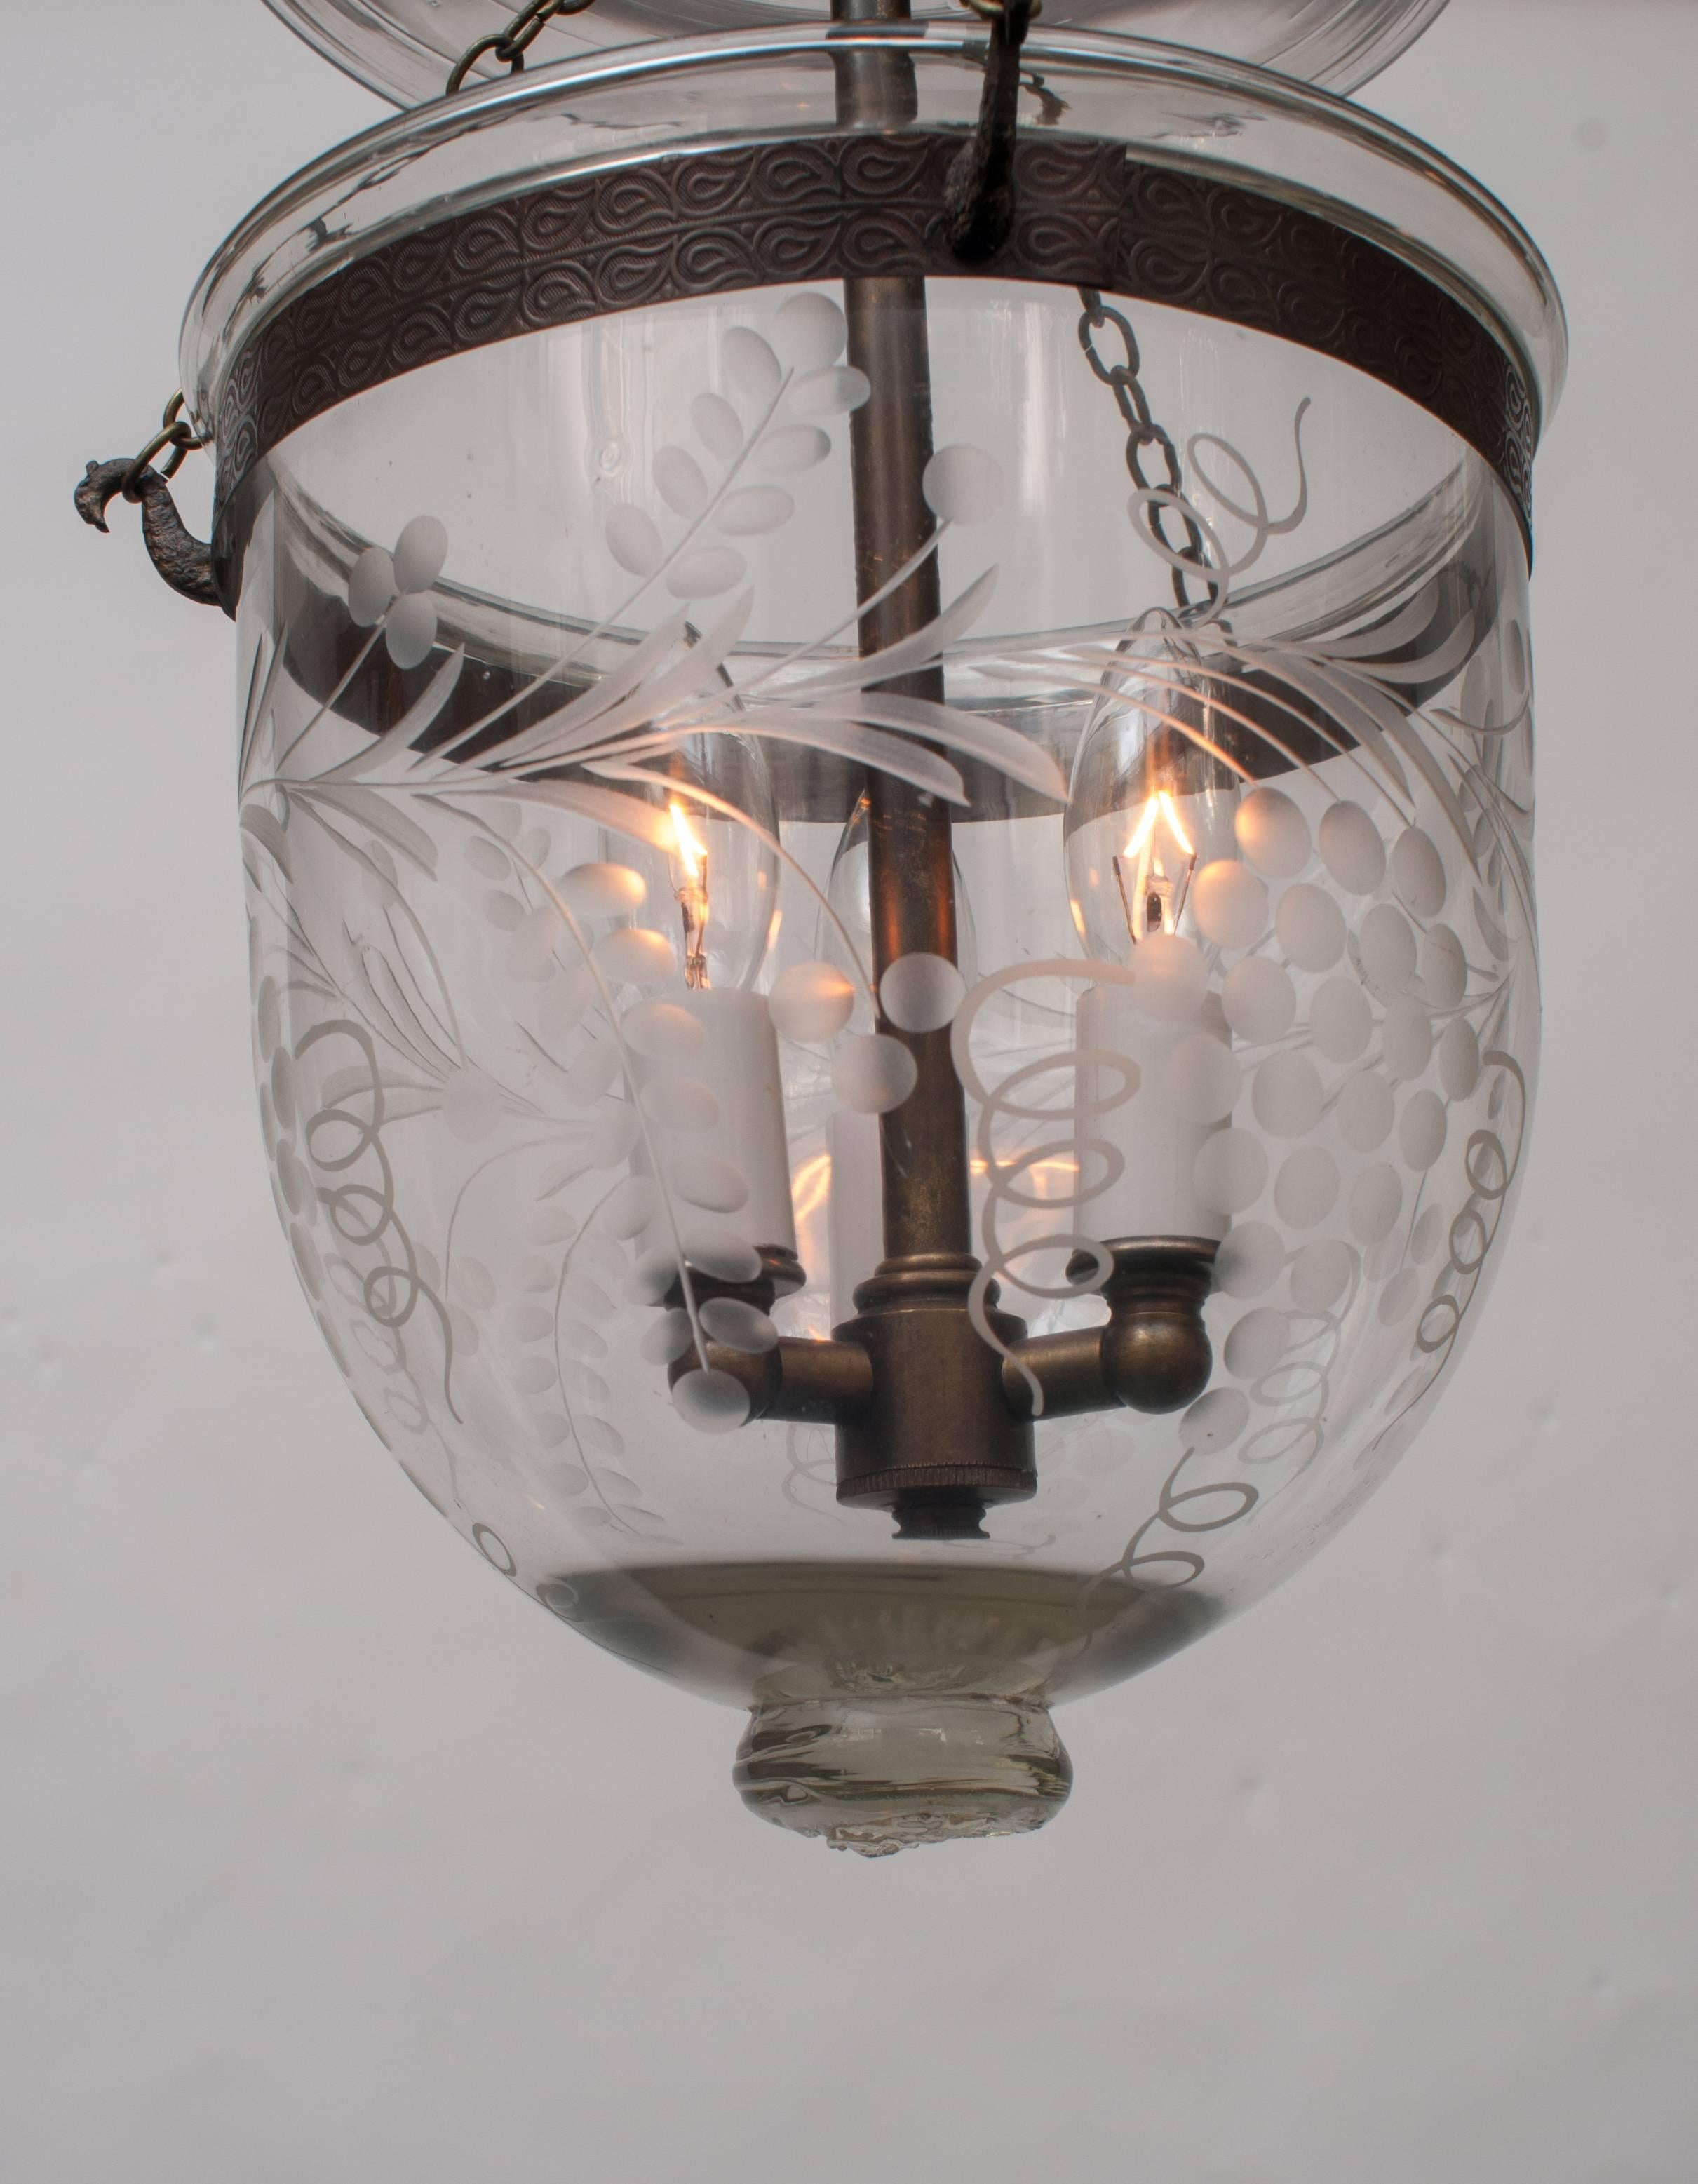 English Bell Jar Lantern with Grape and Vine Etched Design